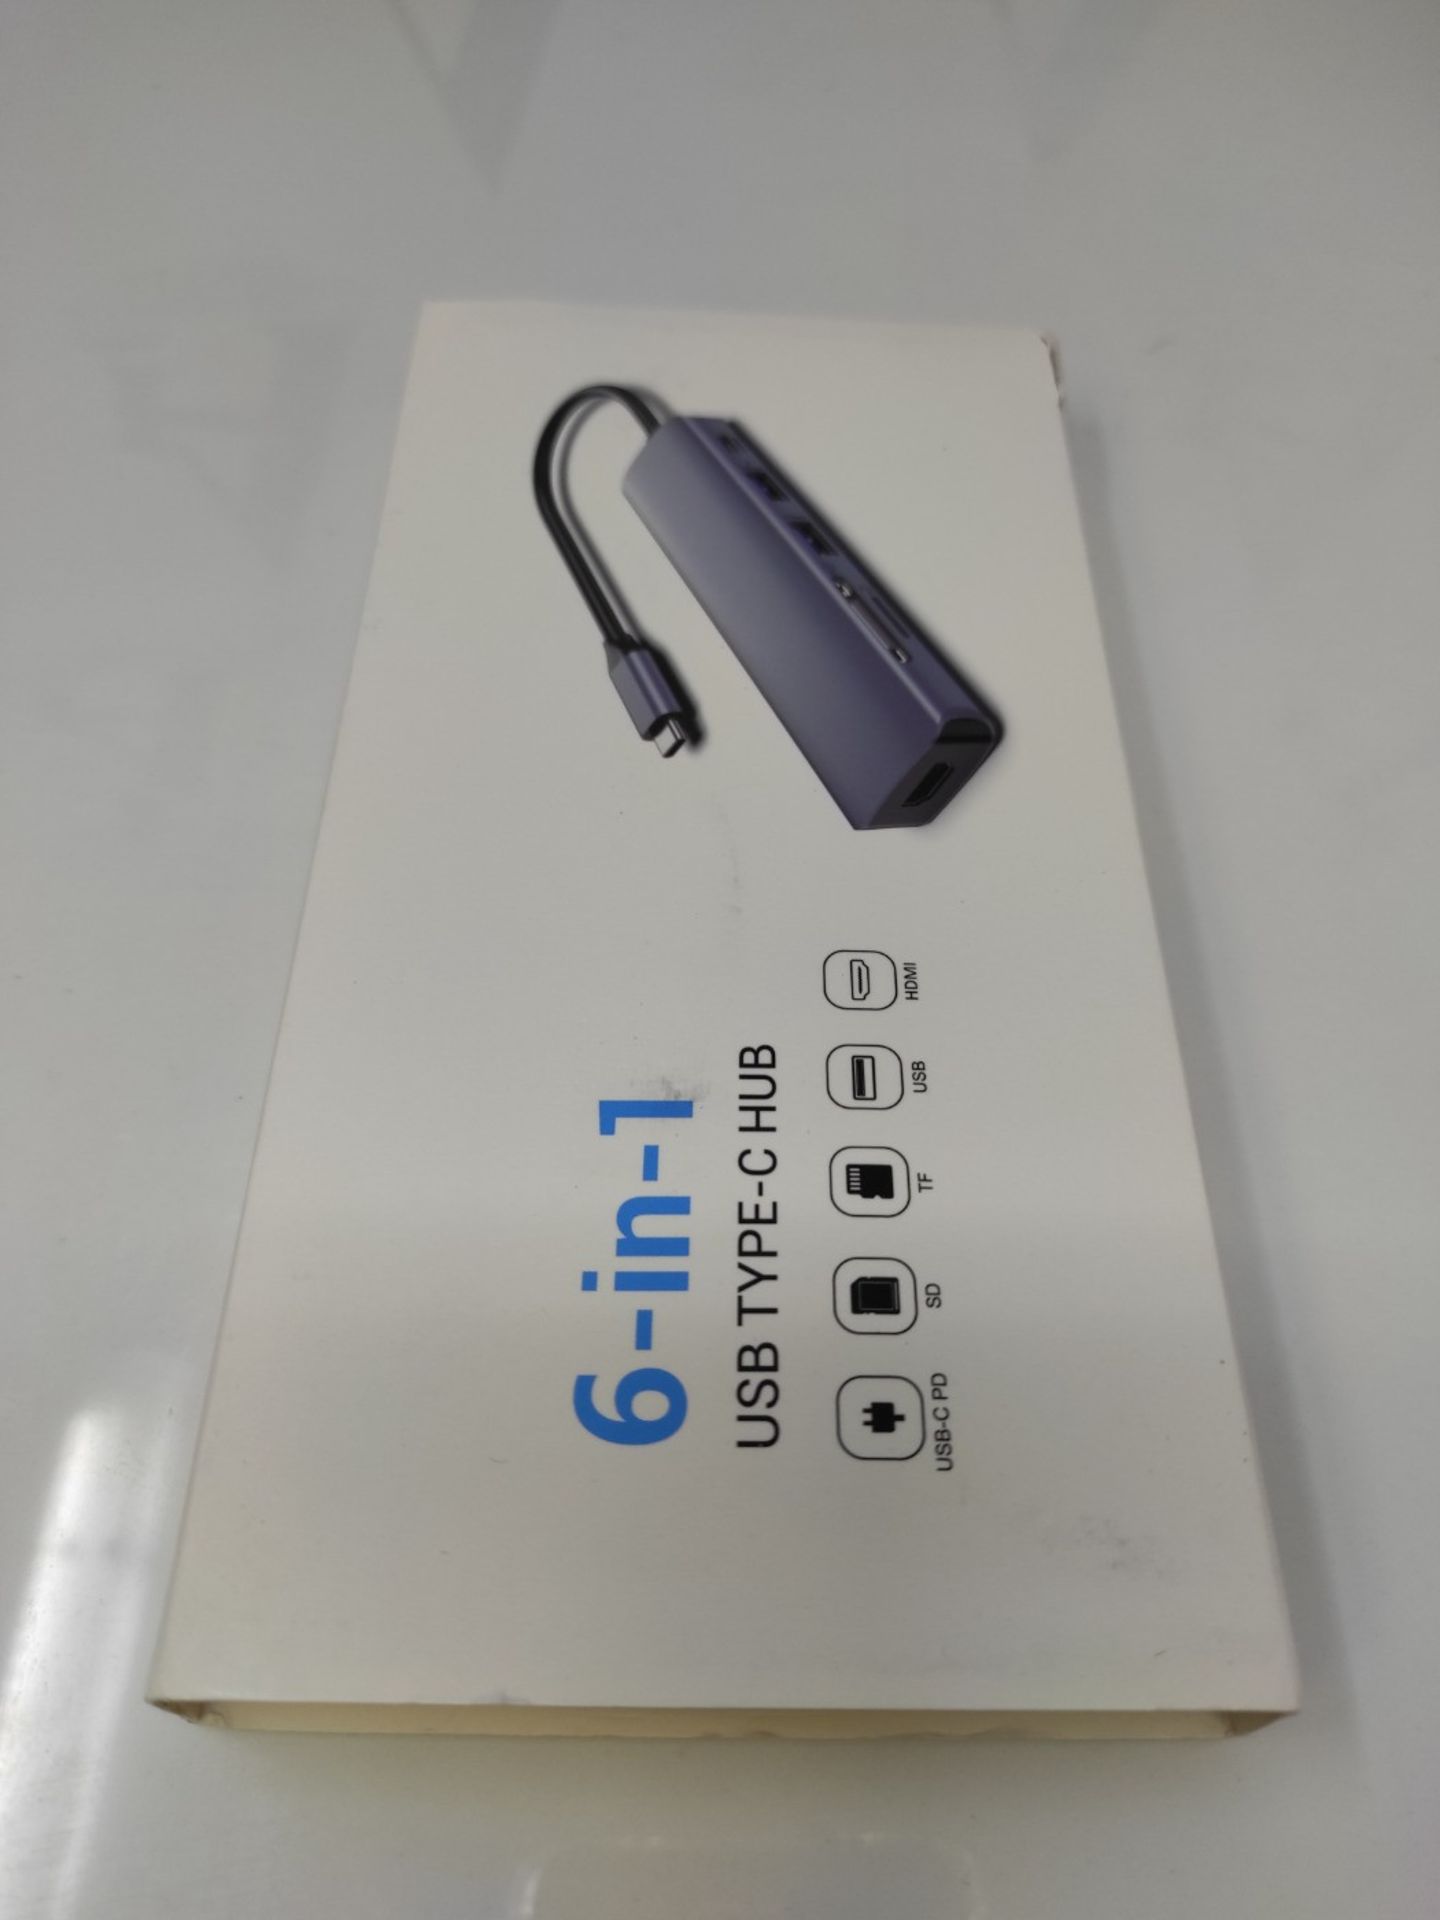 USB C Hub, HOPDAY 6 in 1 Adapter with 4K HDMI, 2 x USB 3.0, SD/TF Card Reader, 100W Ch - Image 2 of 3